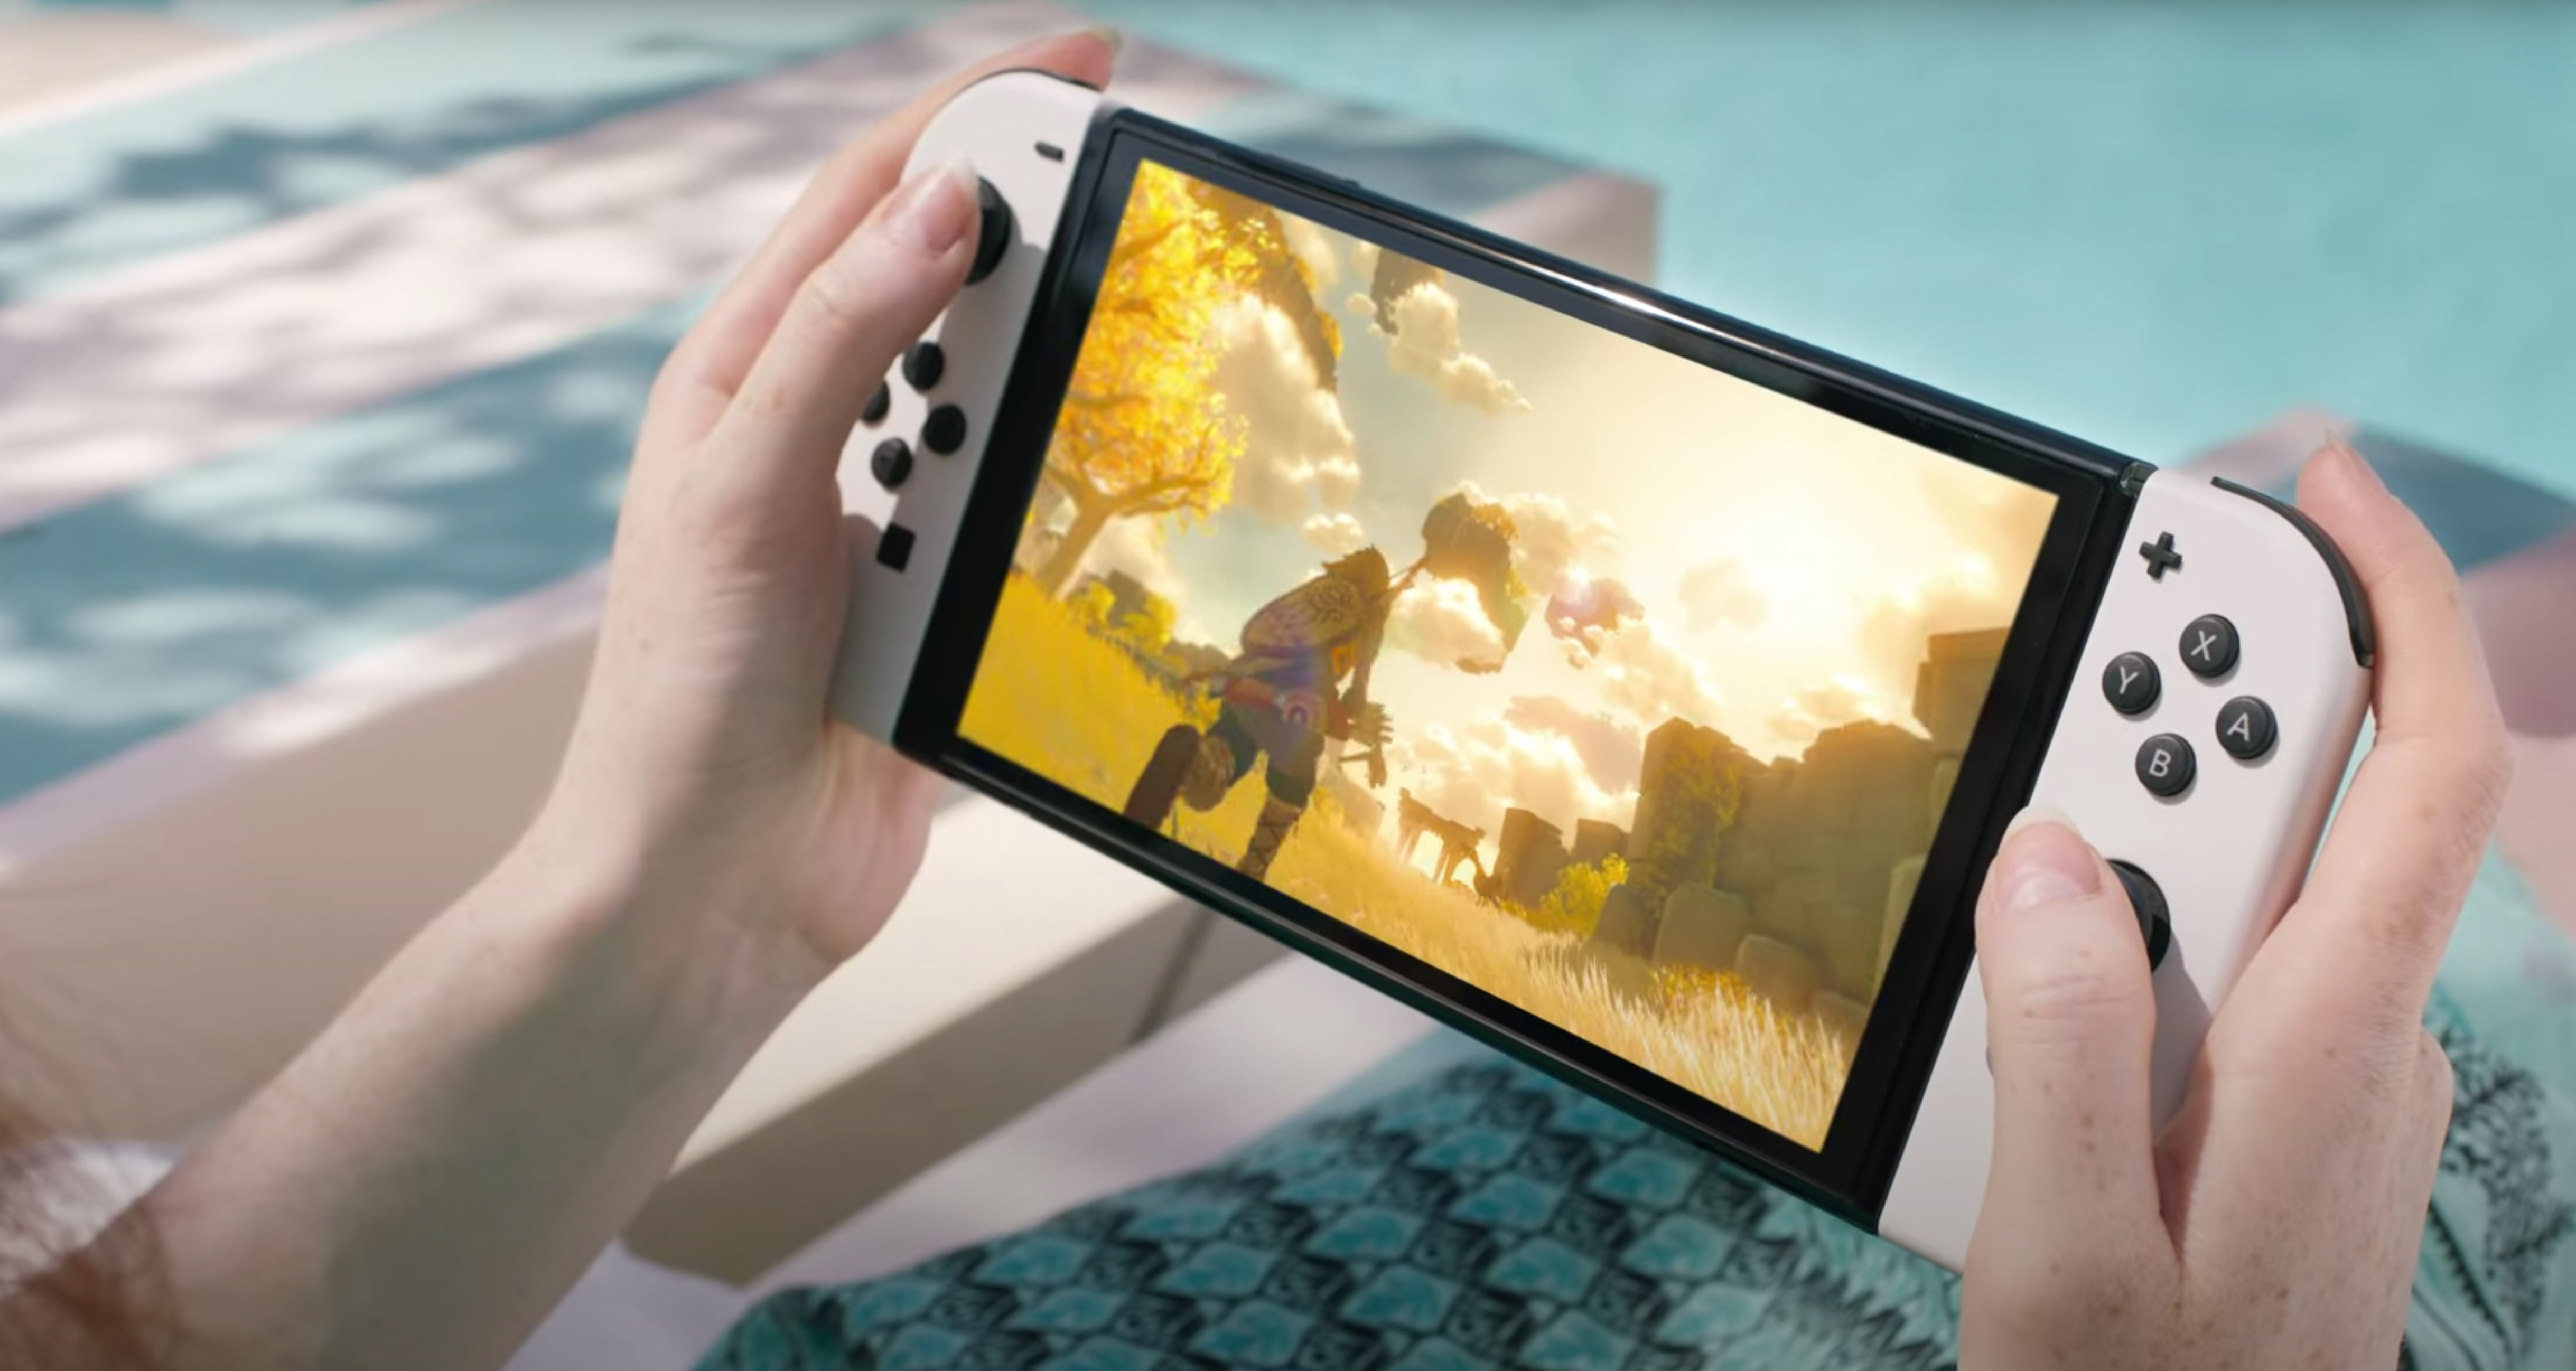 Nintendo Switch OLED pre-orders live: Where to buy new Switch OLED